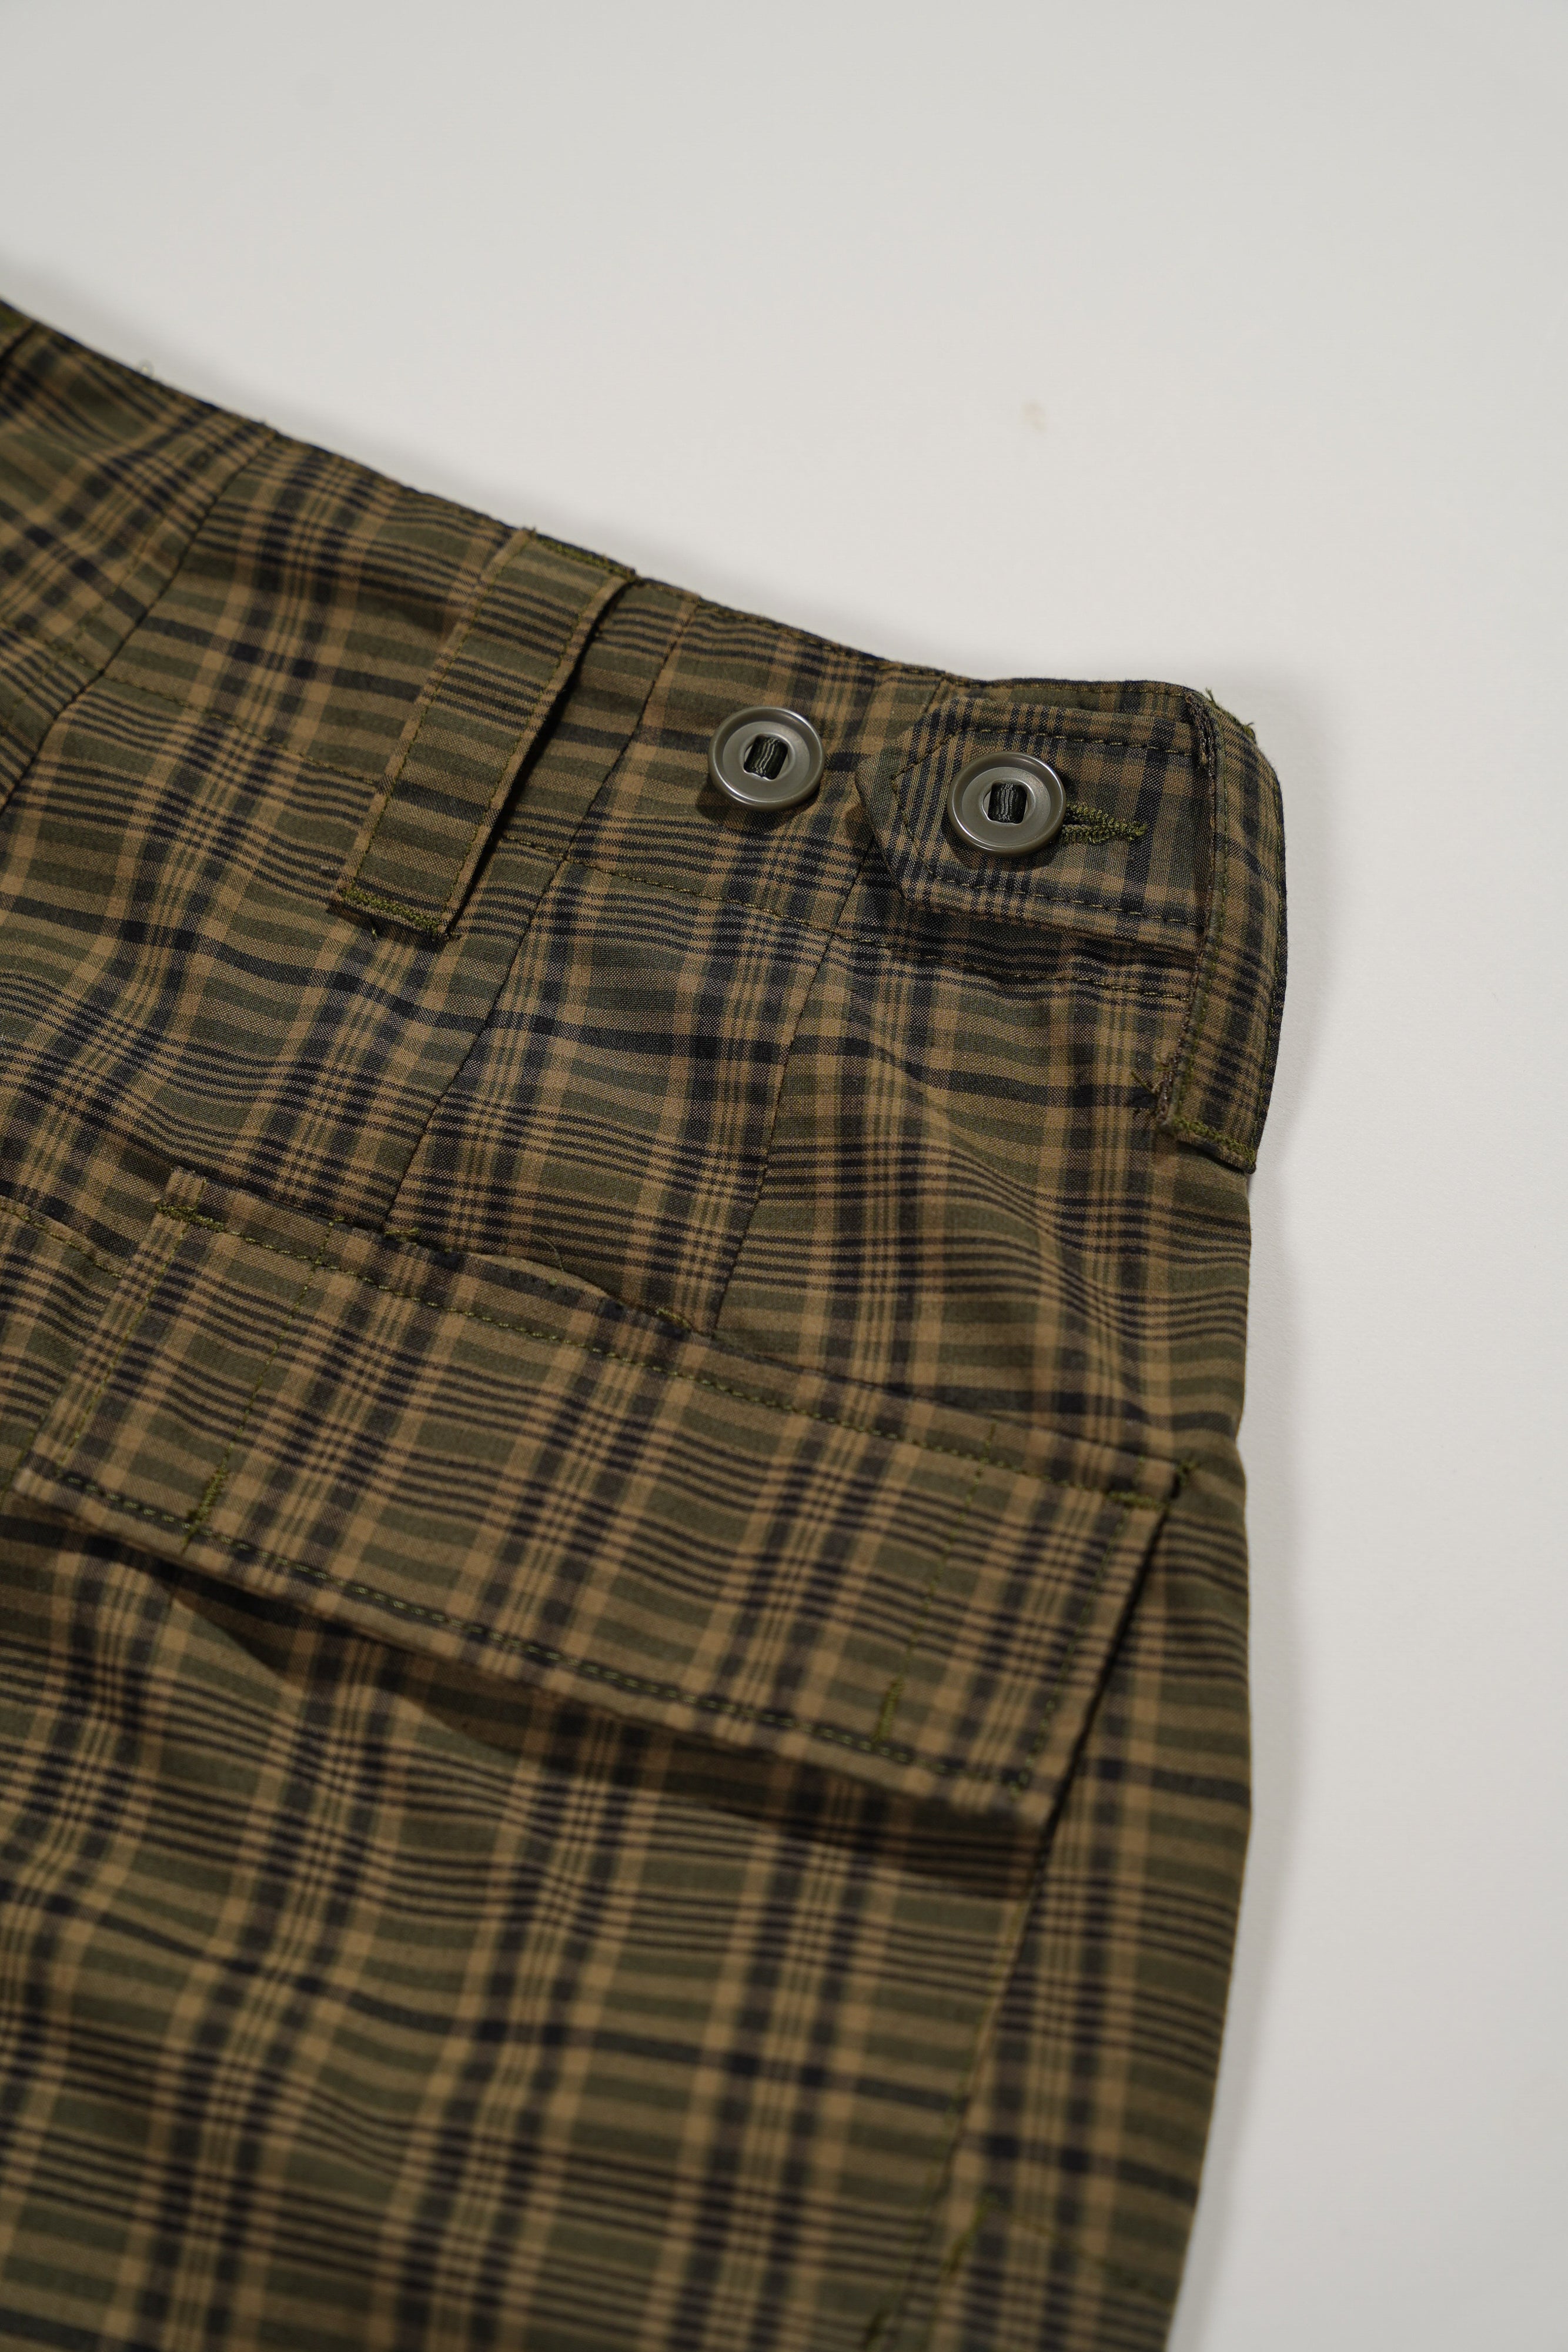 Engineered Garments Blank Label Royal Gaucho Pants - Olive Poly Cotton Small Plaid